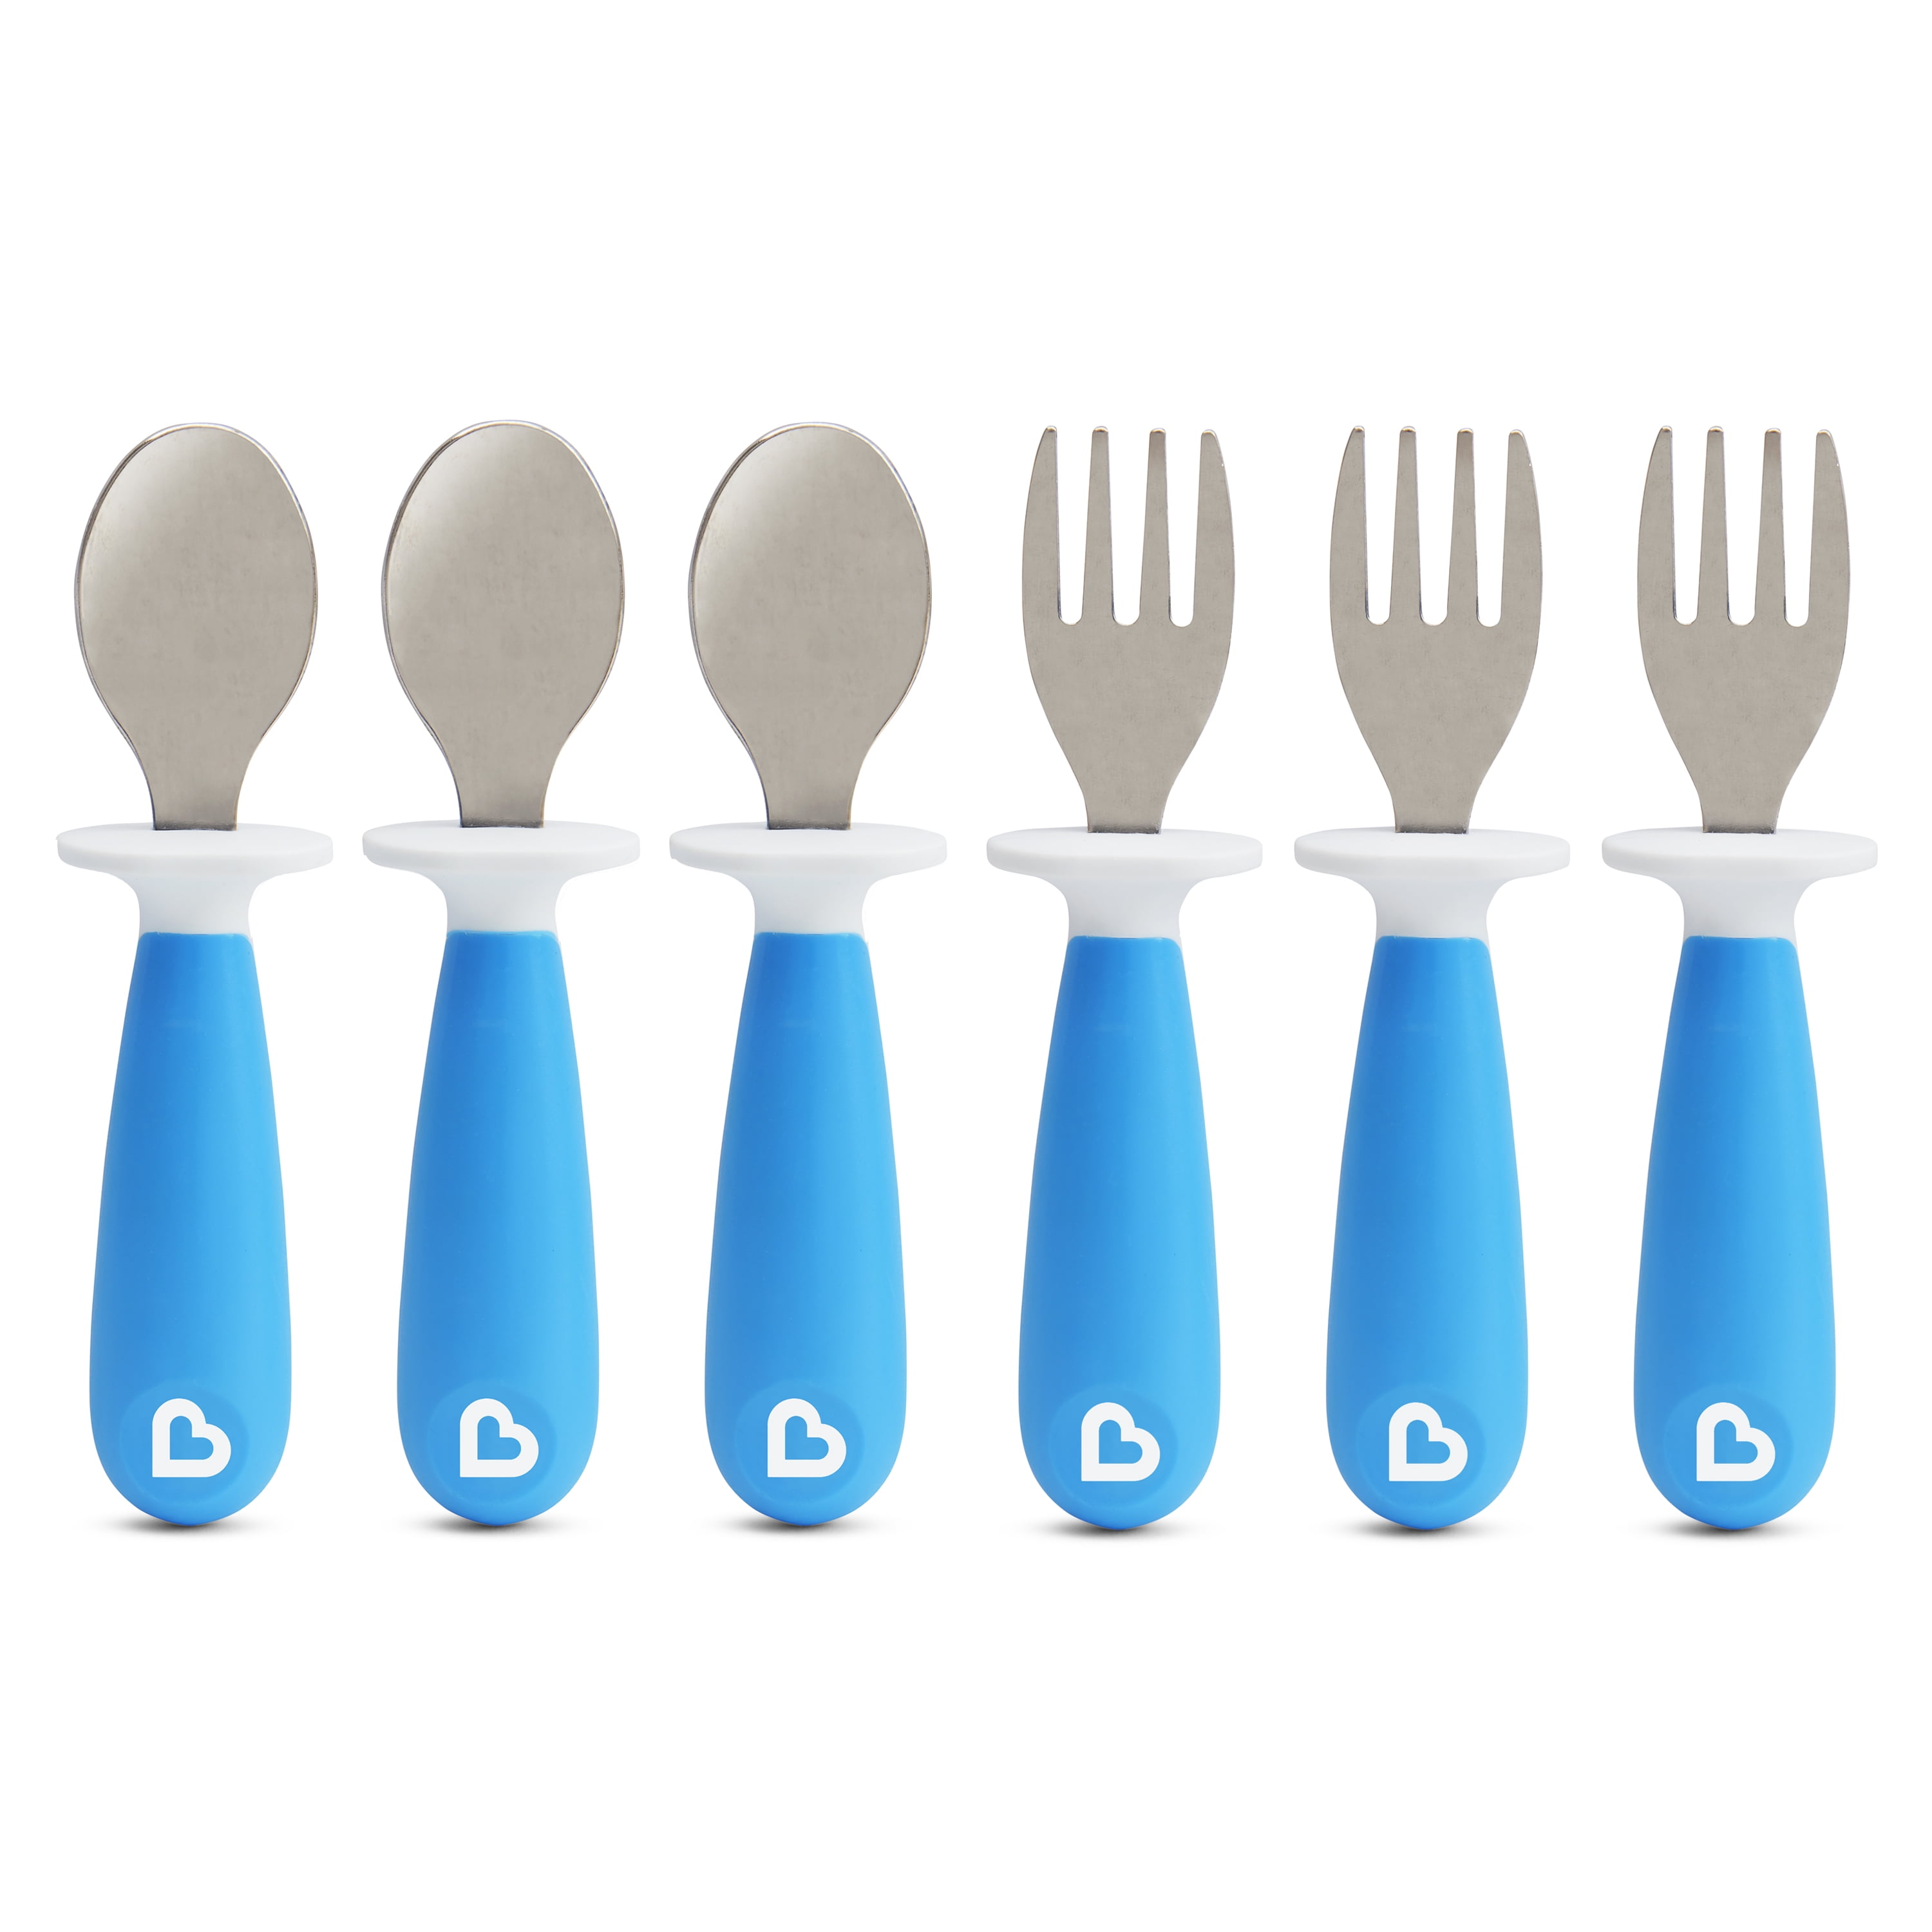  Munchkin® The Baby Toon™ Silicone Teether Spoon